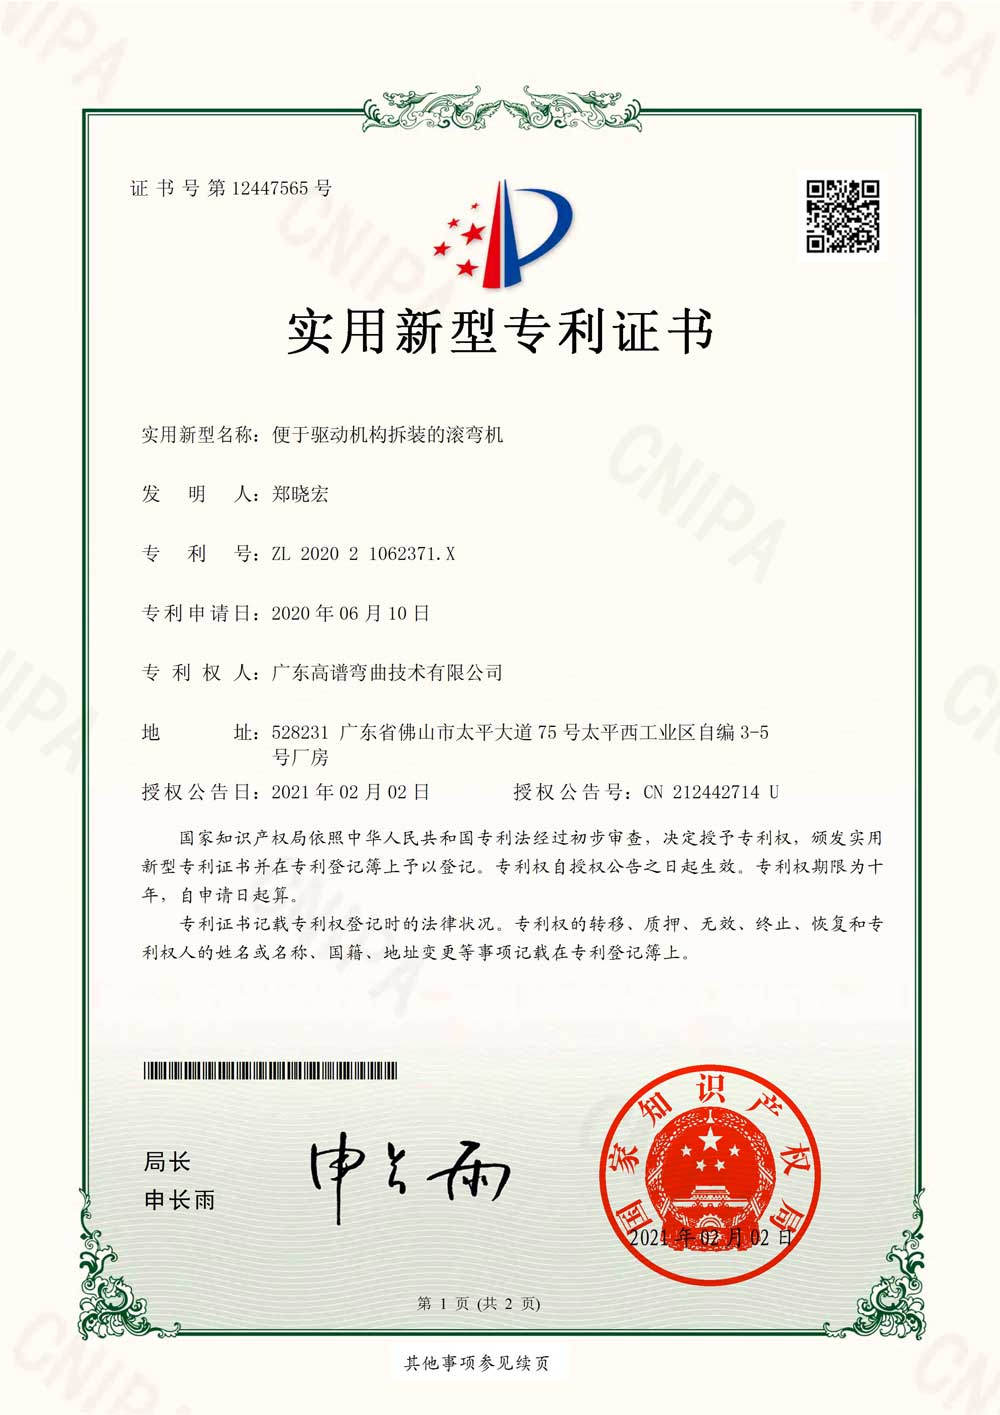 CNC roll and stretch bending machine G Clef driving mechanism disassembly patent certificate